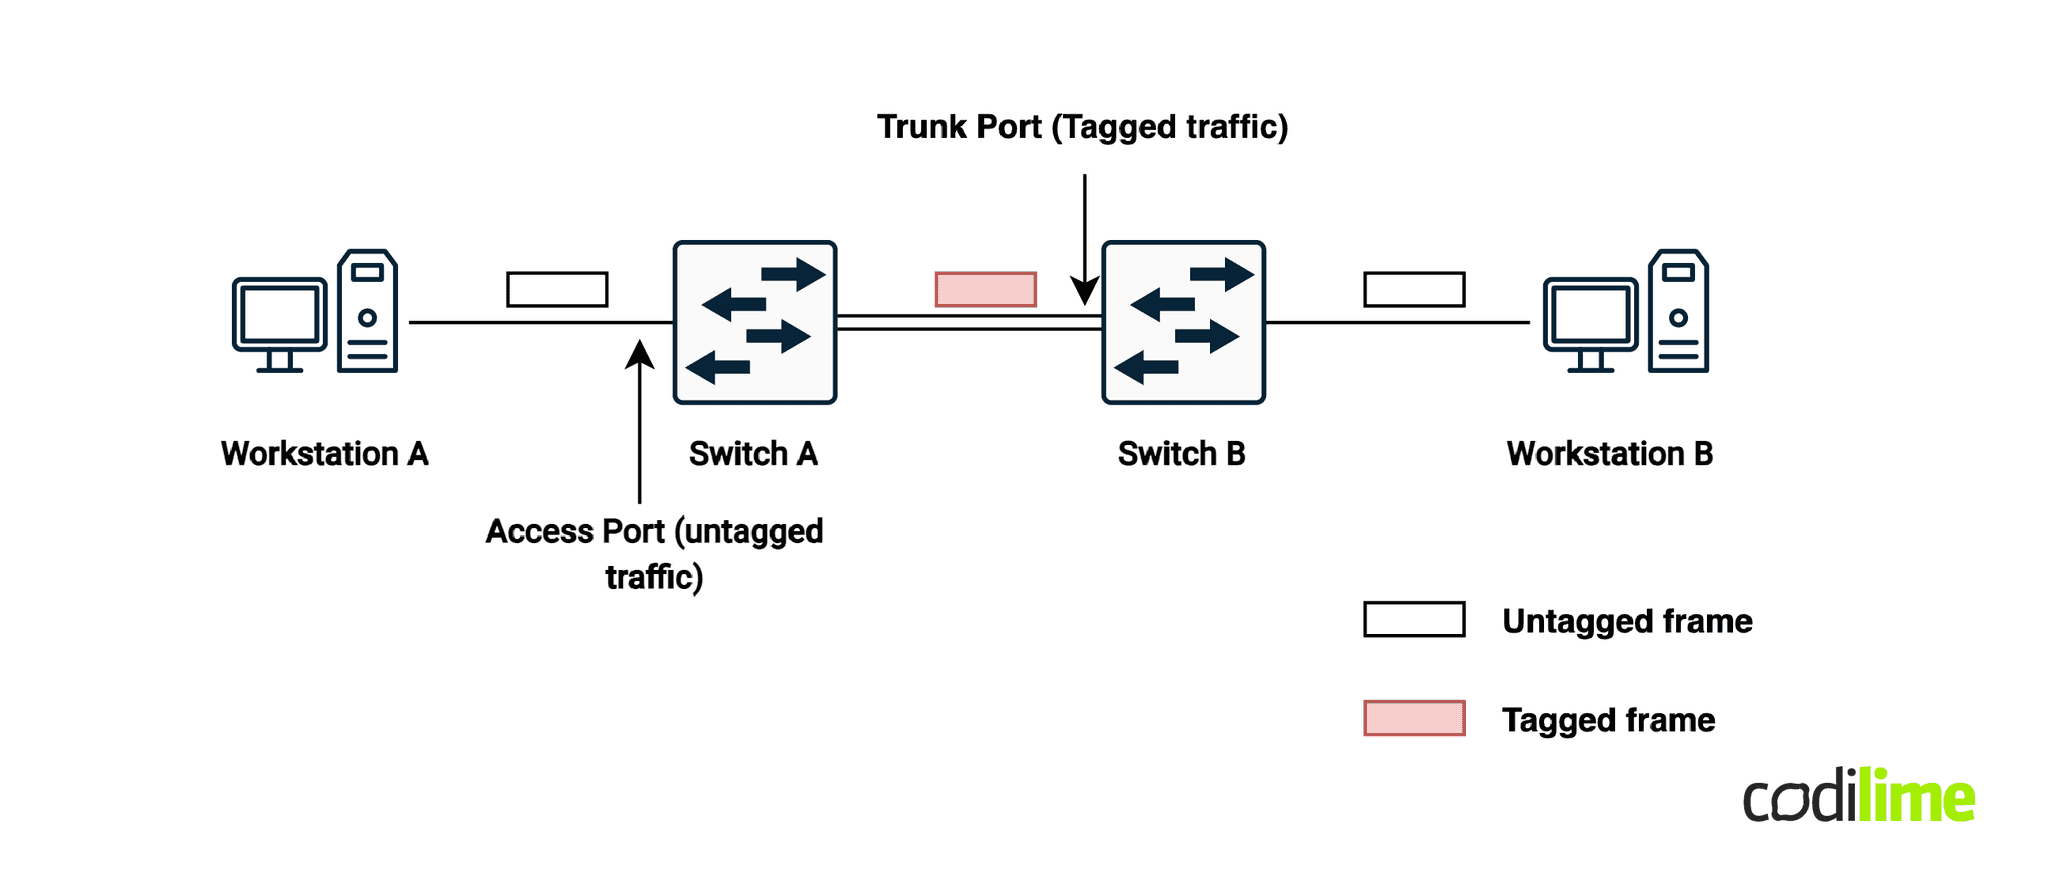 Multitenancy support in a traditional DC - L2, VLAN-based only